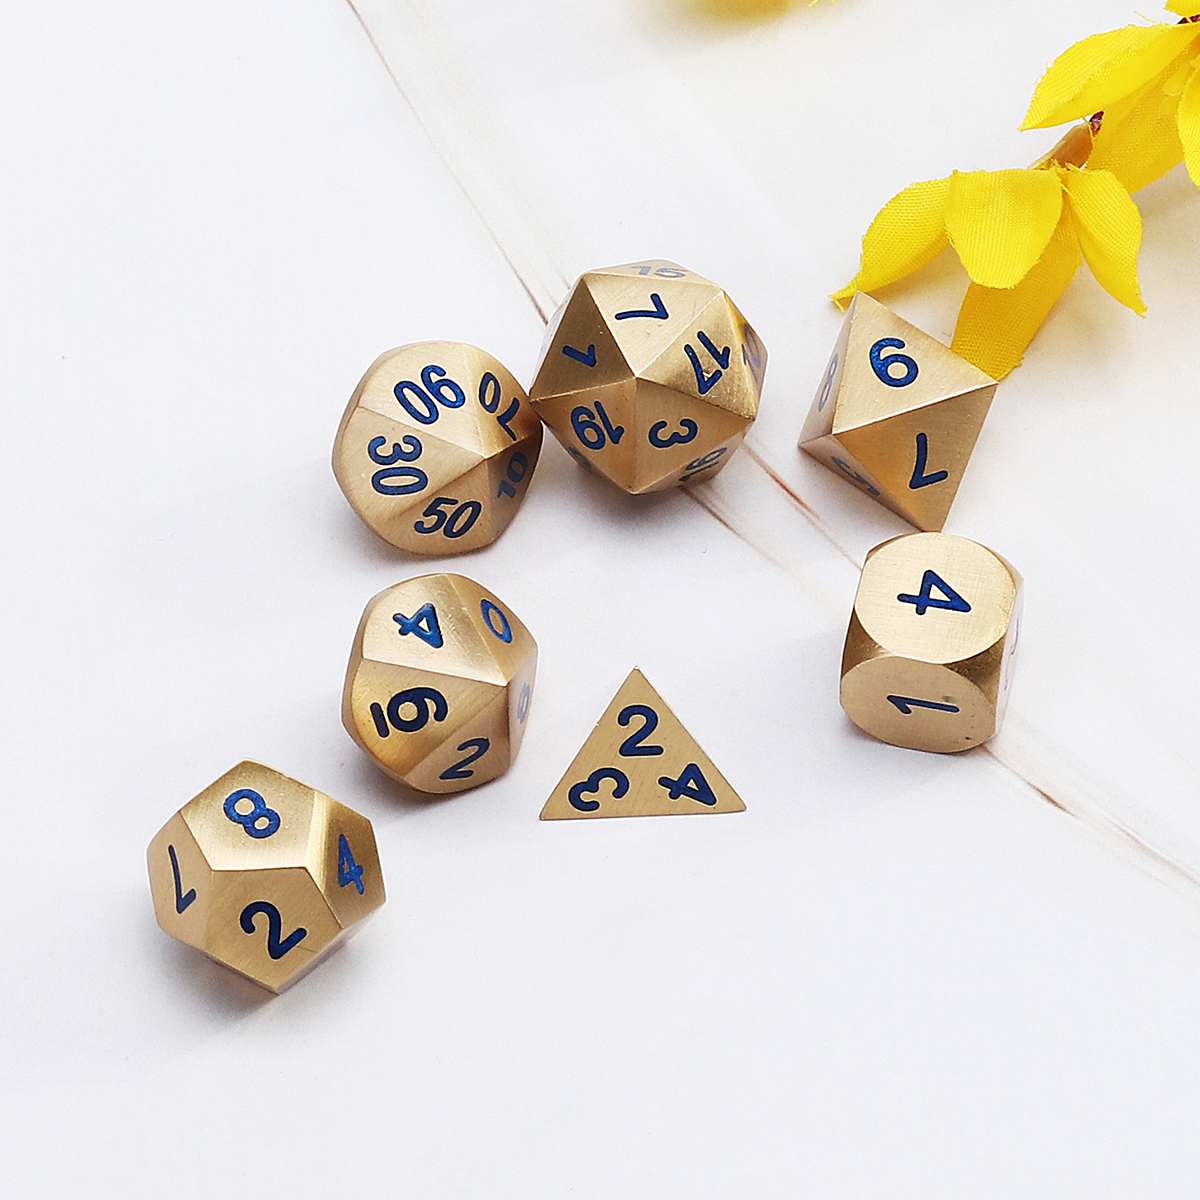 Pure-Copper-Polyhedral-Dices-Set-Metal-Role-Playing-Game-Dice-Gadget-for-Dungeons-Dragon-Games-Gift-1608120-4